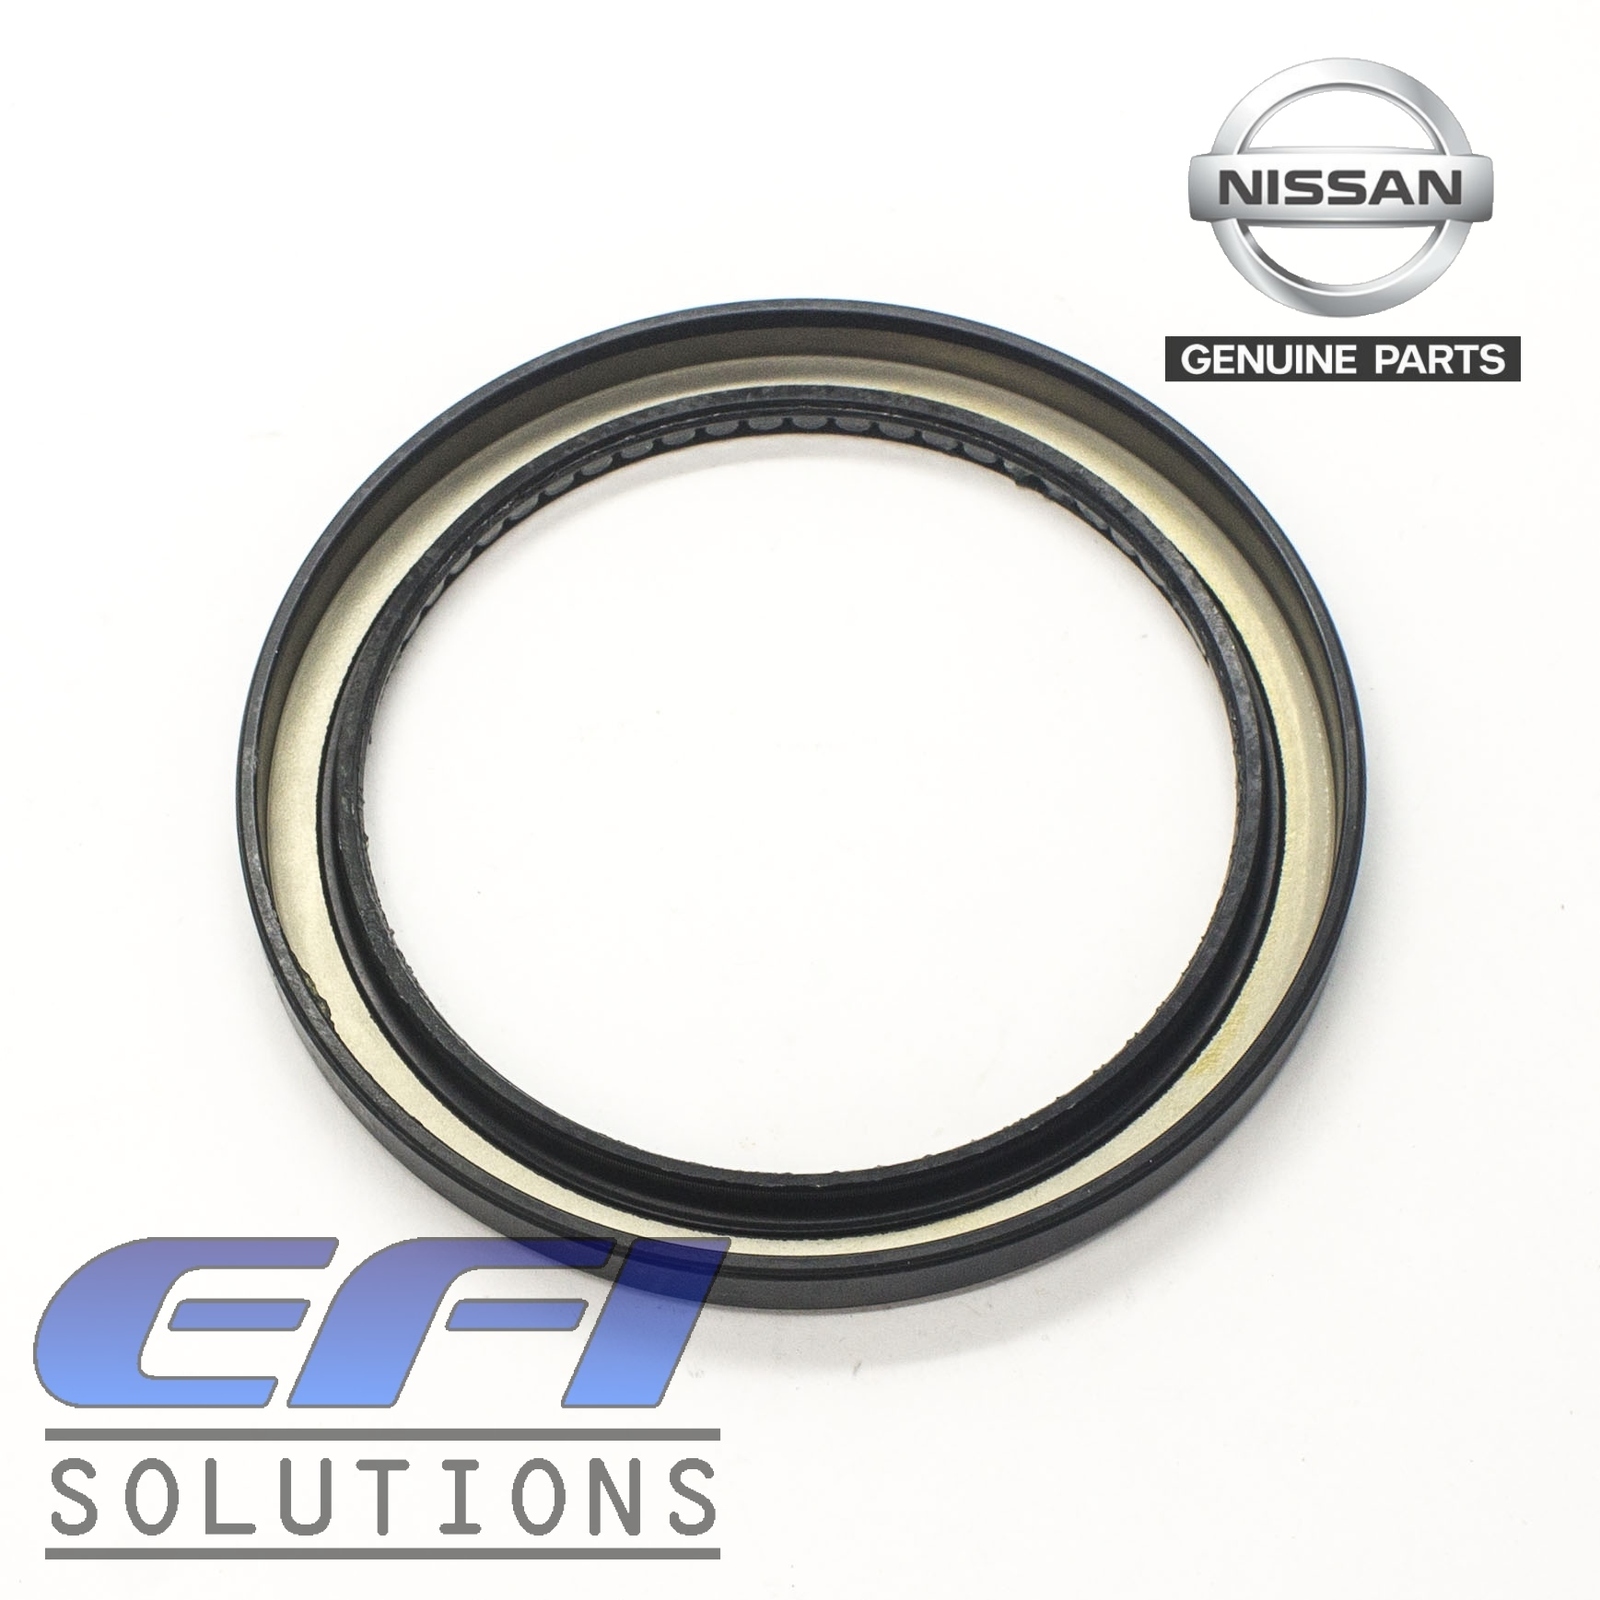 Nissan OEM Front and Rear Main Oil Seal R32 R33 R34 RB20 RB25 RB26 Skyline